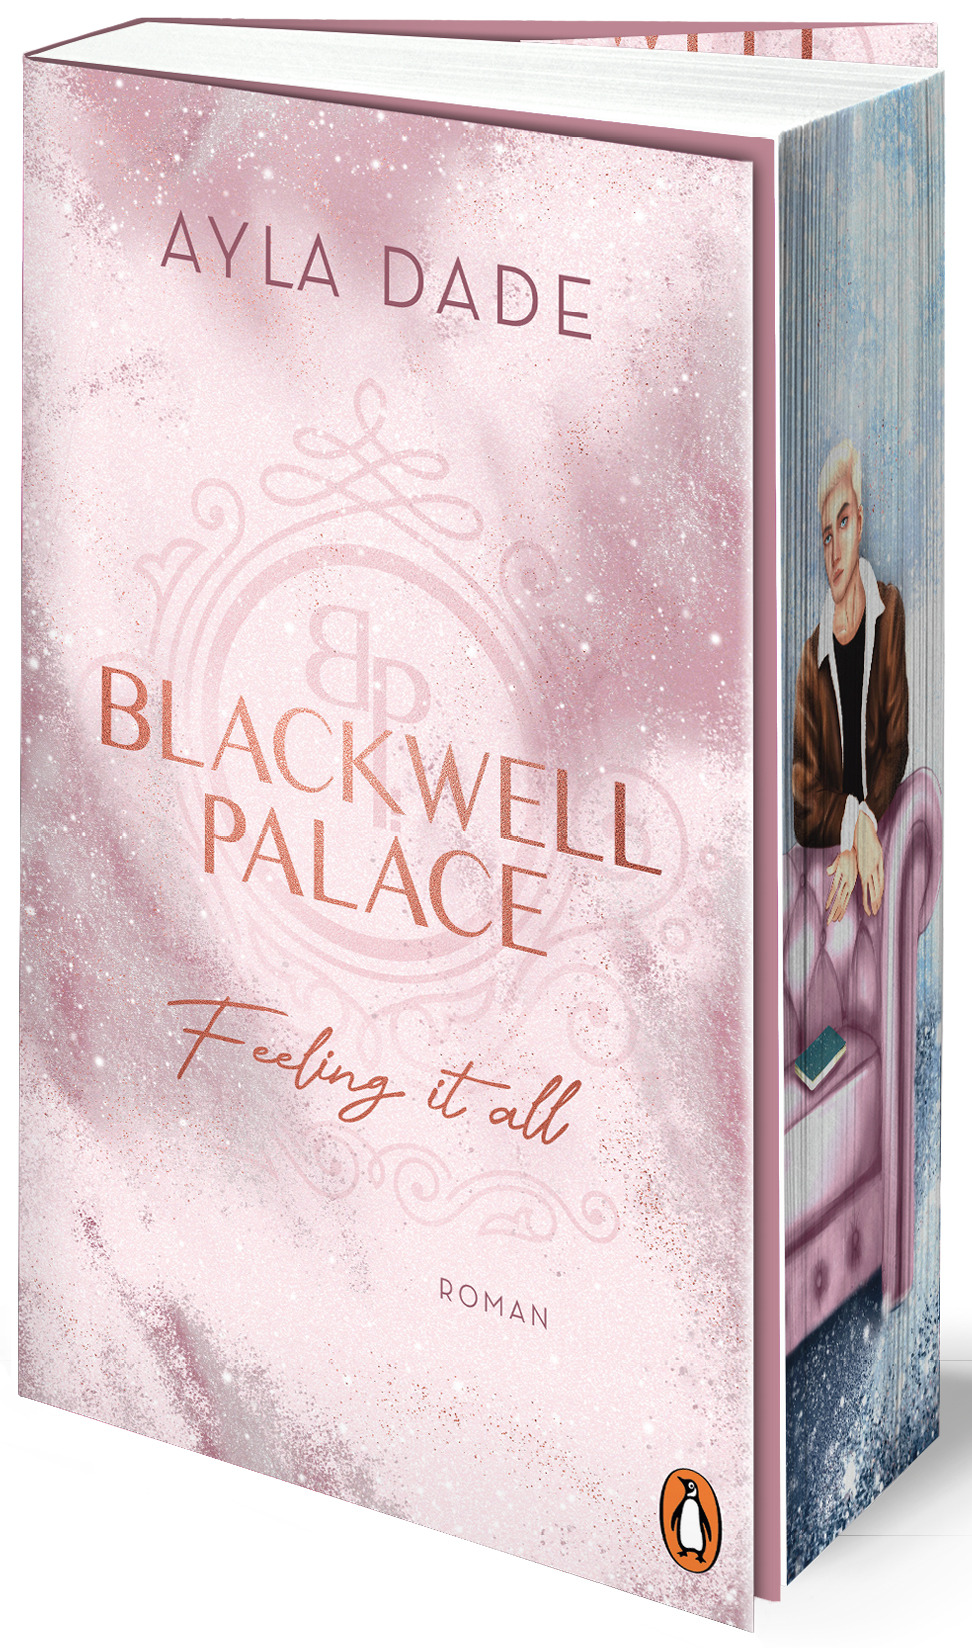 Dade A - Blackwell Palace - Feeling it all_mit Farbschnitt